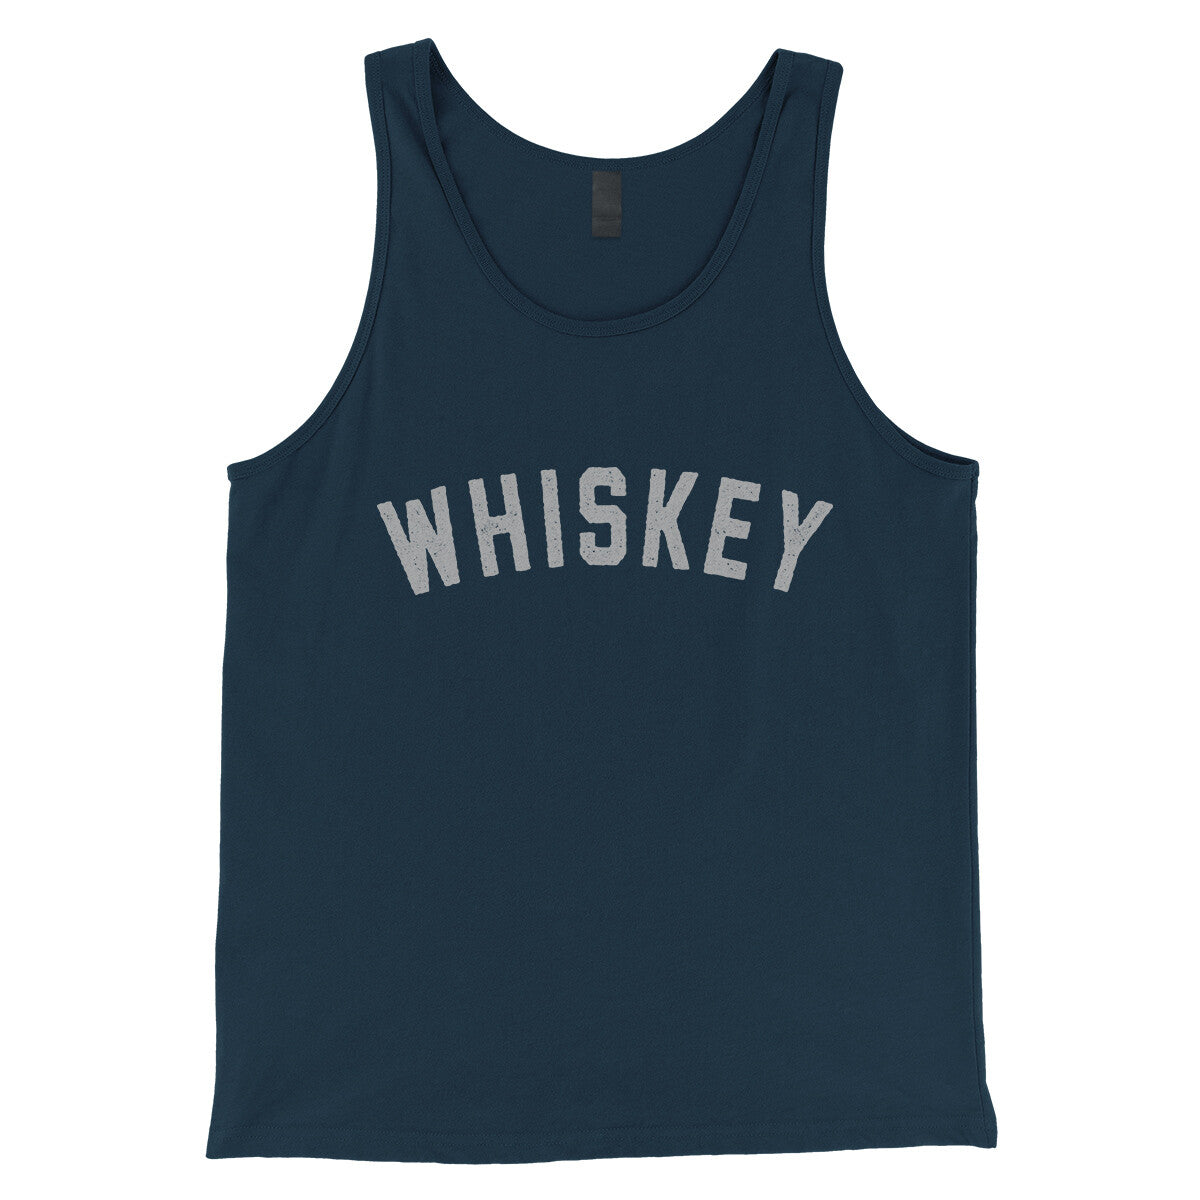 Whiskey in Navy Color